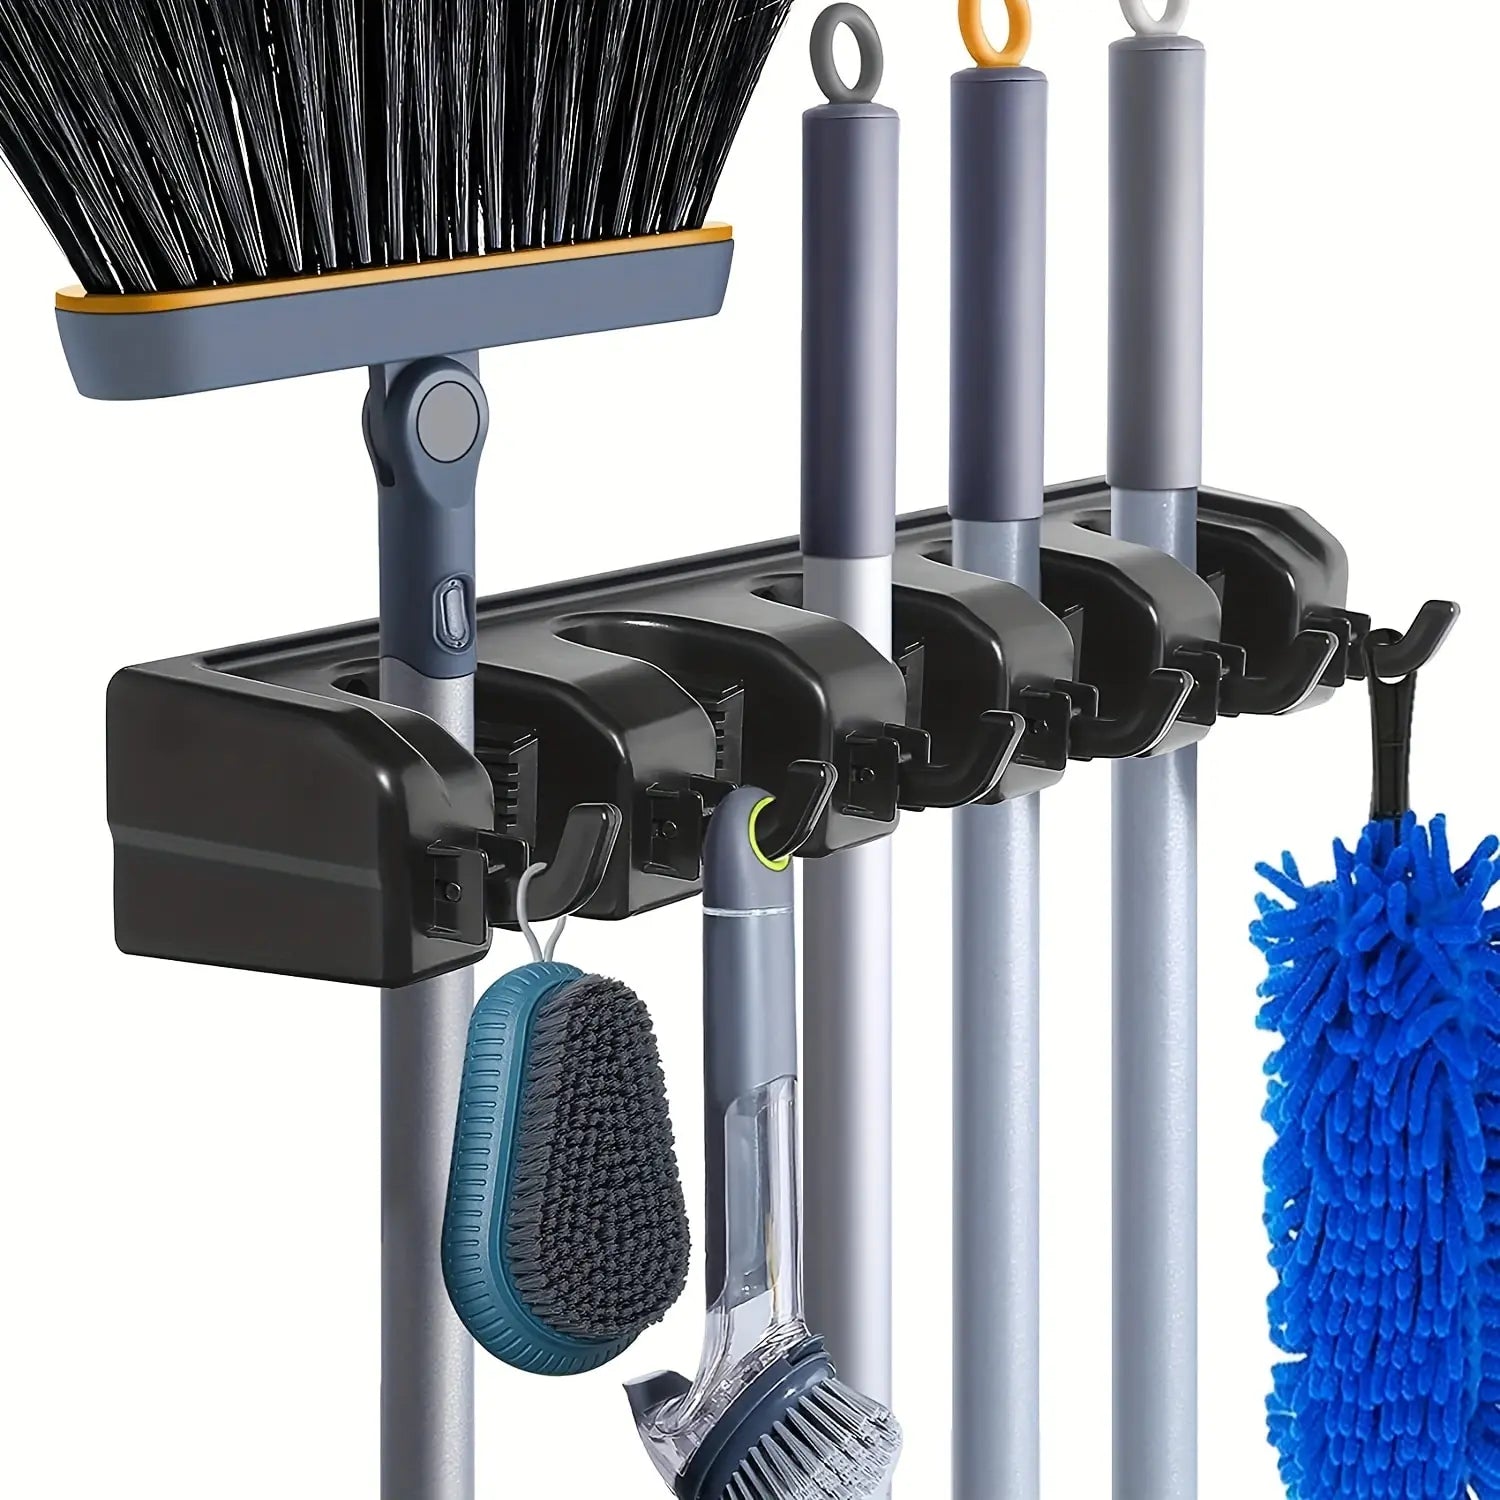 Multi-Functional Wall-Mounted Mop Holder: Organize with Ease